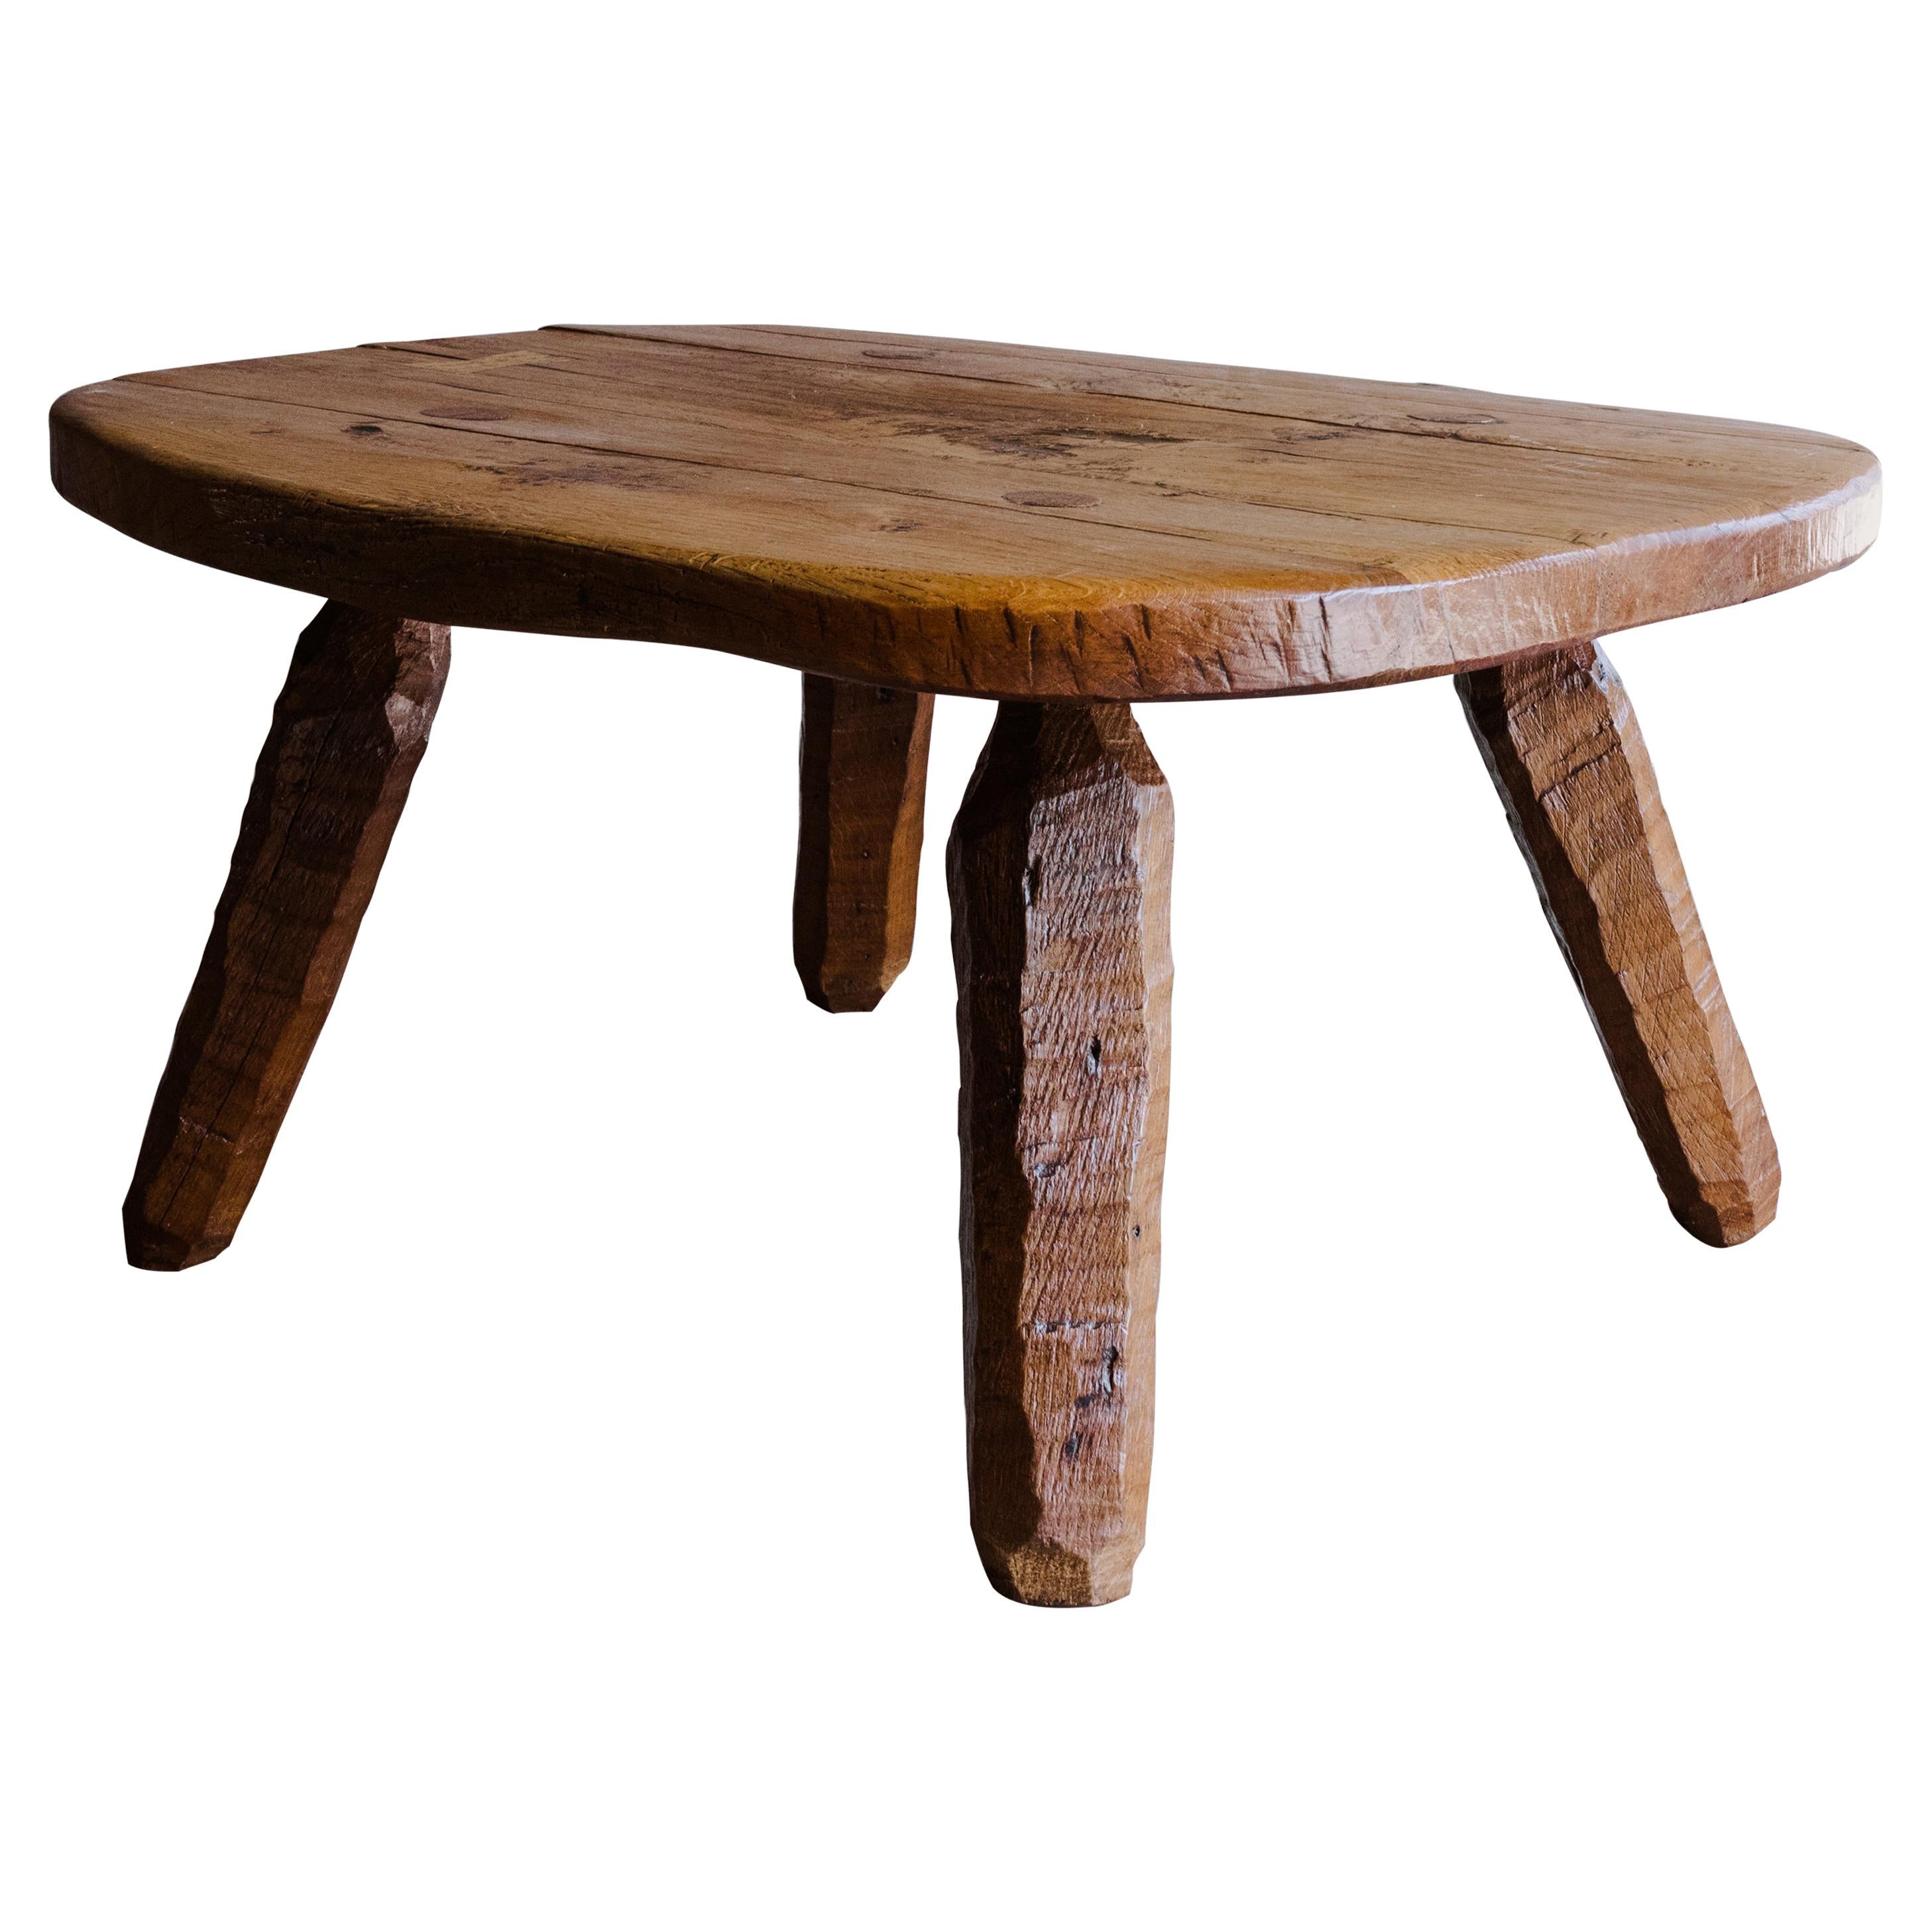 Vintage Oak Coffee Table From France, Circa 1960